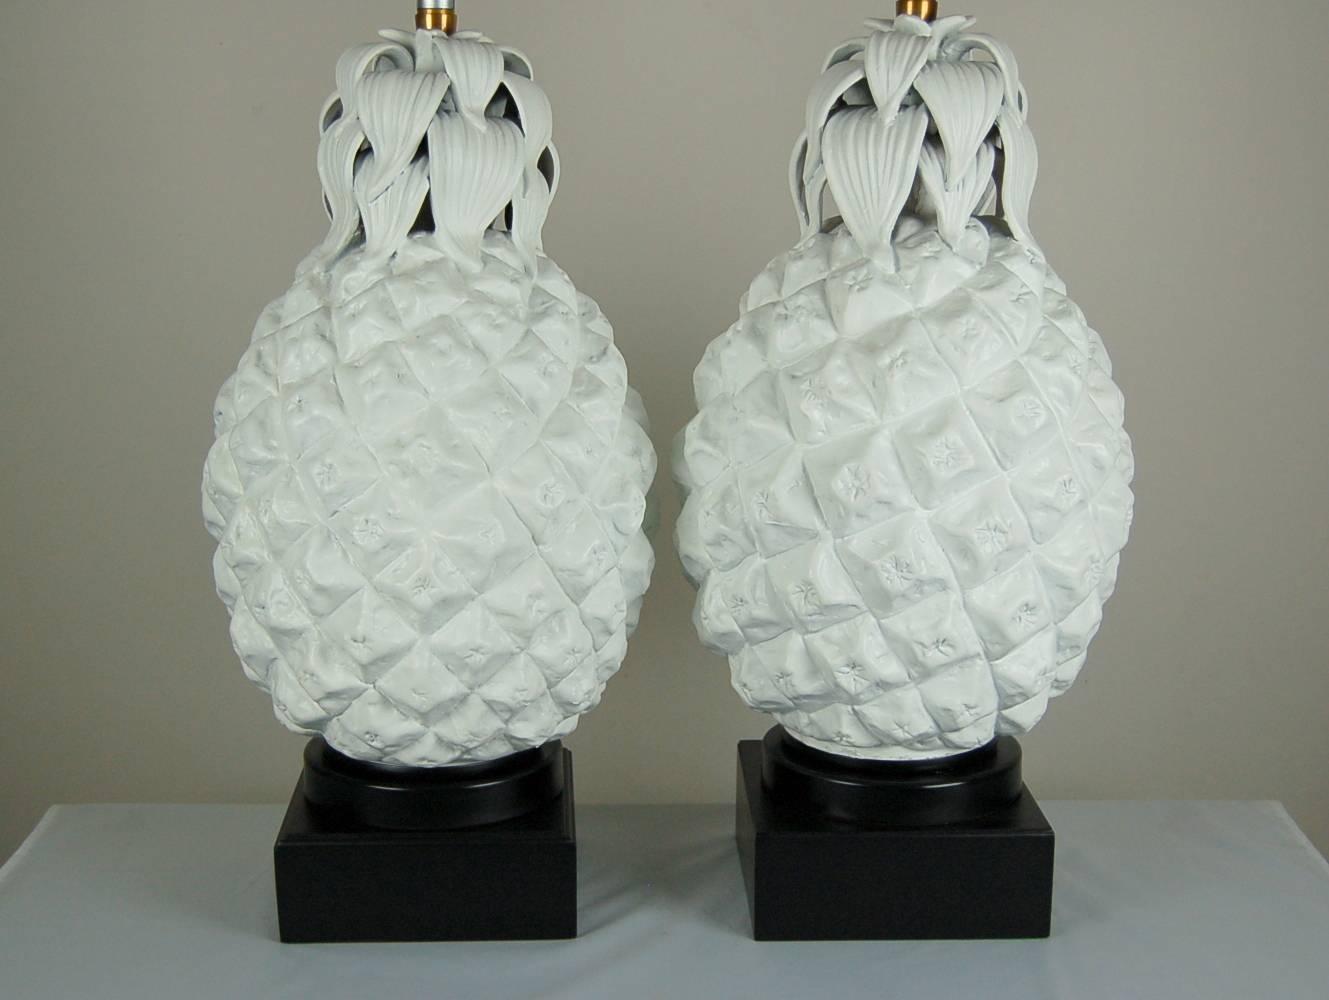 Lacquered Matched Pair of Vintage Italian Ceramic Pineapple Lamps from Marbro